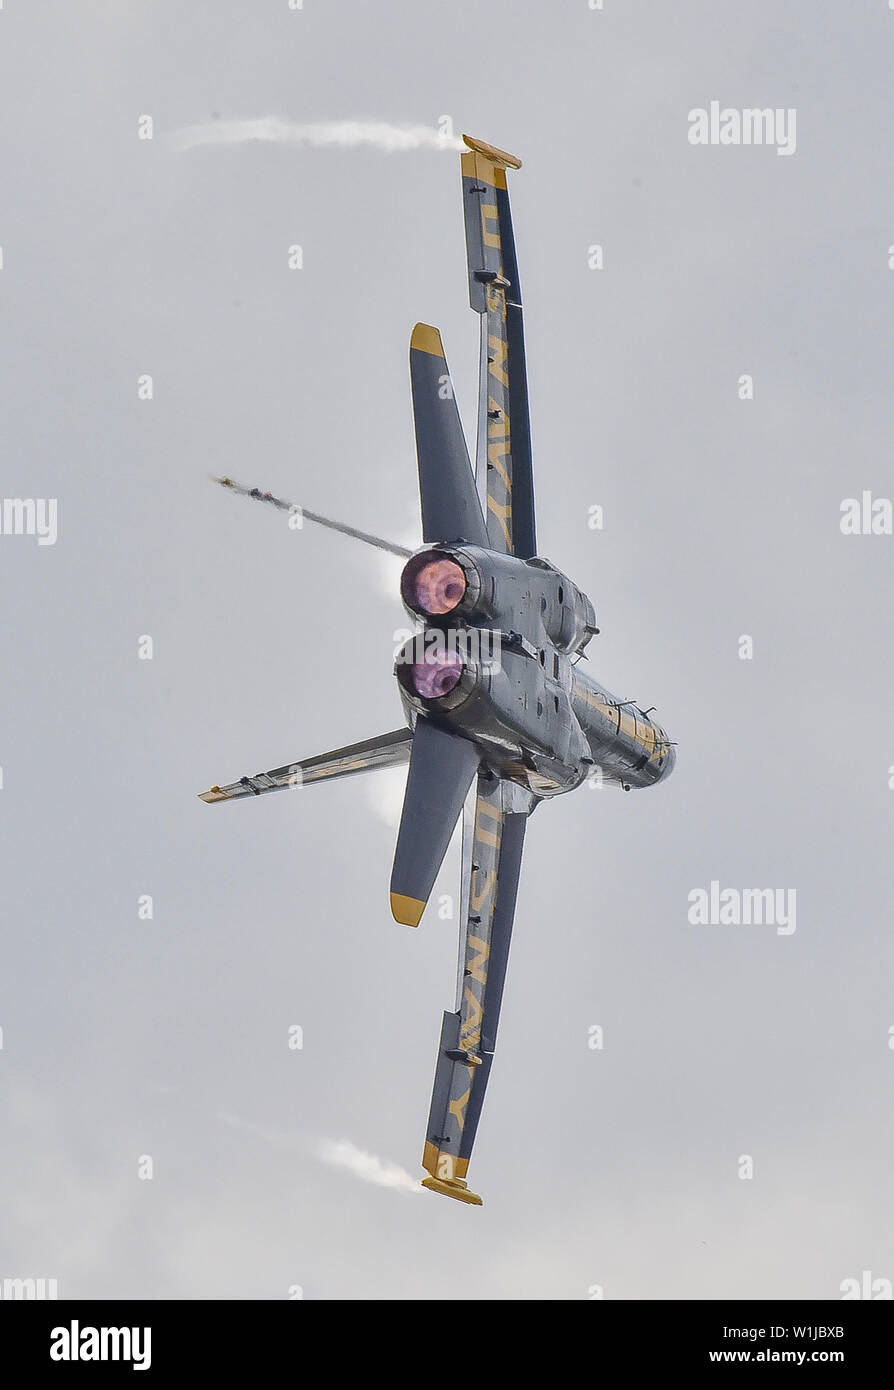 190629-N-UK306-1058 DAVENPORT, Iowa (June 29, 2019) Lt. Cmdr. Brandon Hempler, lead solo pilot assigned to the U.S. Navy Flight Demonstration Squadron, the Blue Angels, performs the minimum-radius turn maneuver during a demonstration at the Quad City Air Show at the Davenport Municipal Airport in Davenport, Iowa. The team is scheduled to conduct 61 flight demonstrations at 32 locations across the country to showcase the pride and professionalism of the U.S. Navy and Marine Corps to the American and Canadian public in 2019. (U.S. Navy photo by Mass Communication Specialist 2nd Class Timothy Sch Stock Photo